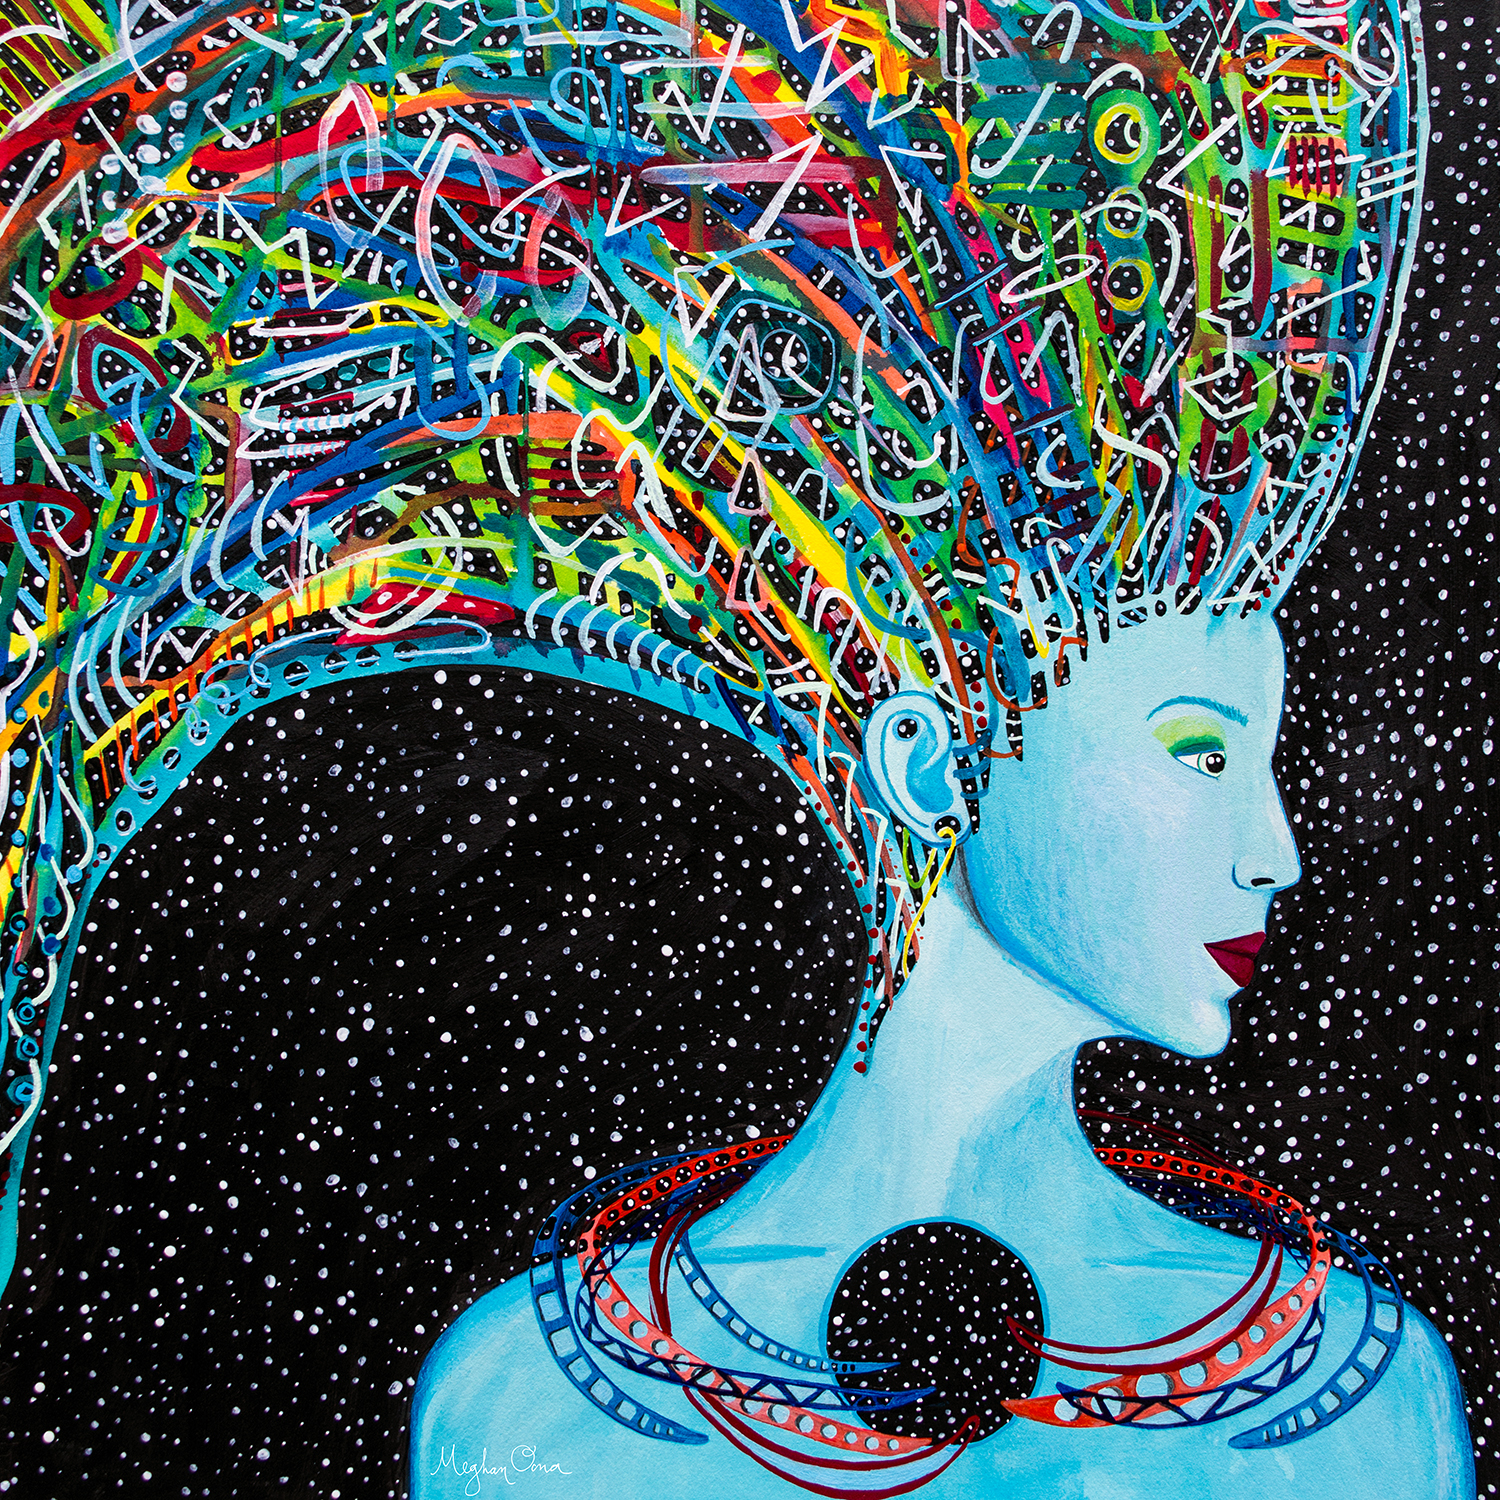 blue feminine being with large colorful hair wearing abstract necklaces surrounded by stars